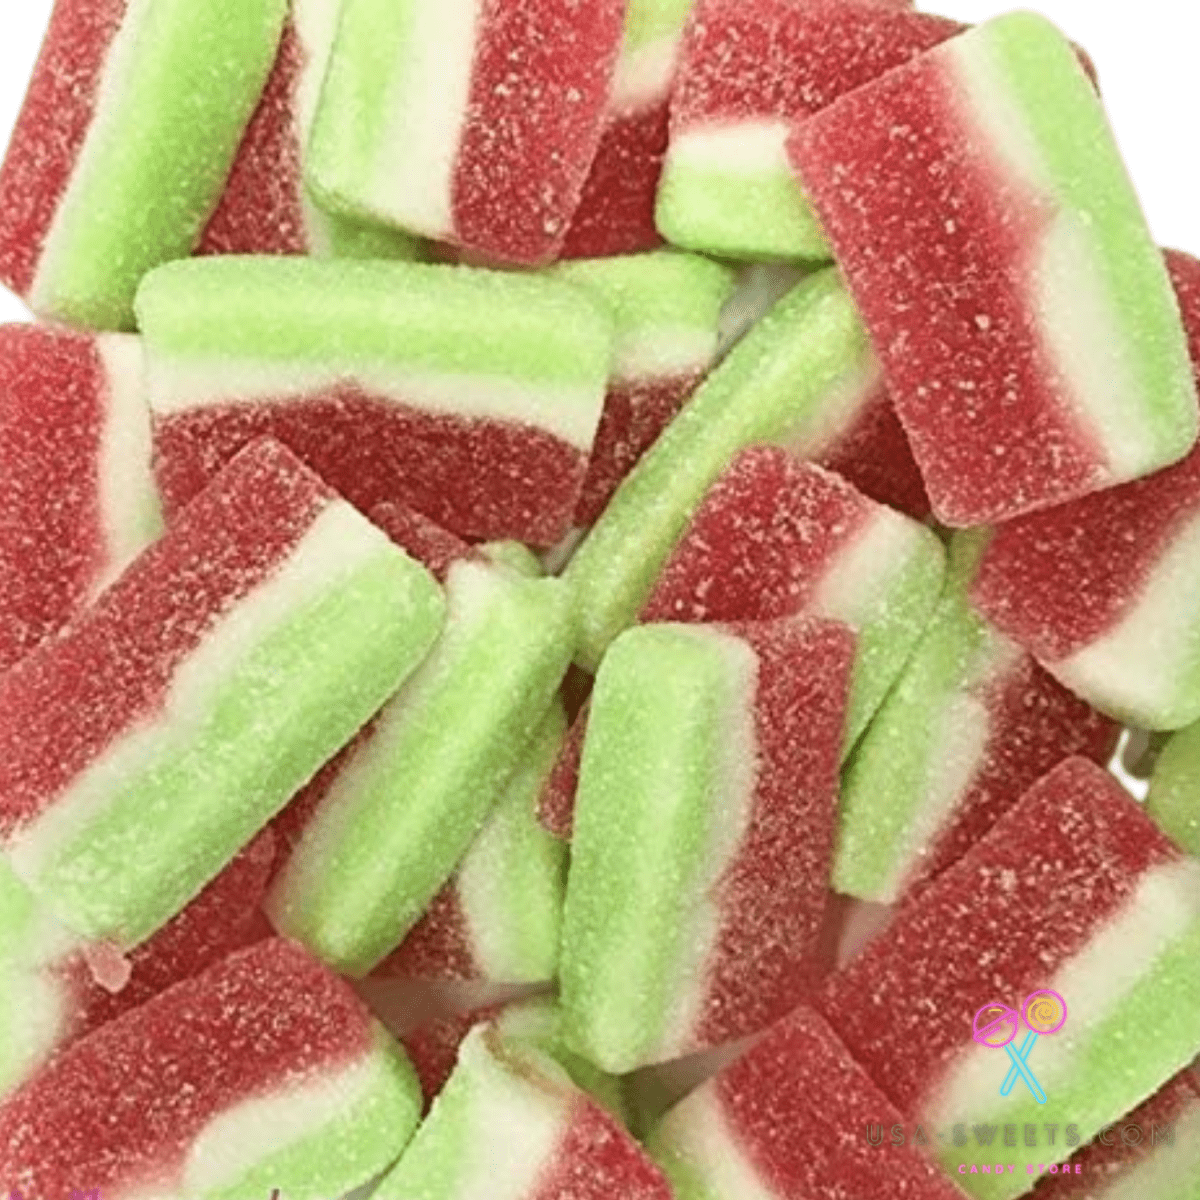 Watermelon Slices - Lolliland 200G - Divinity Collection